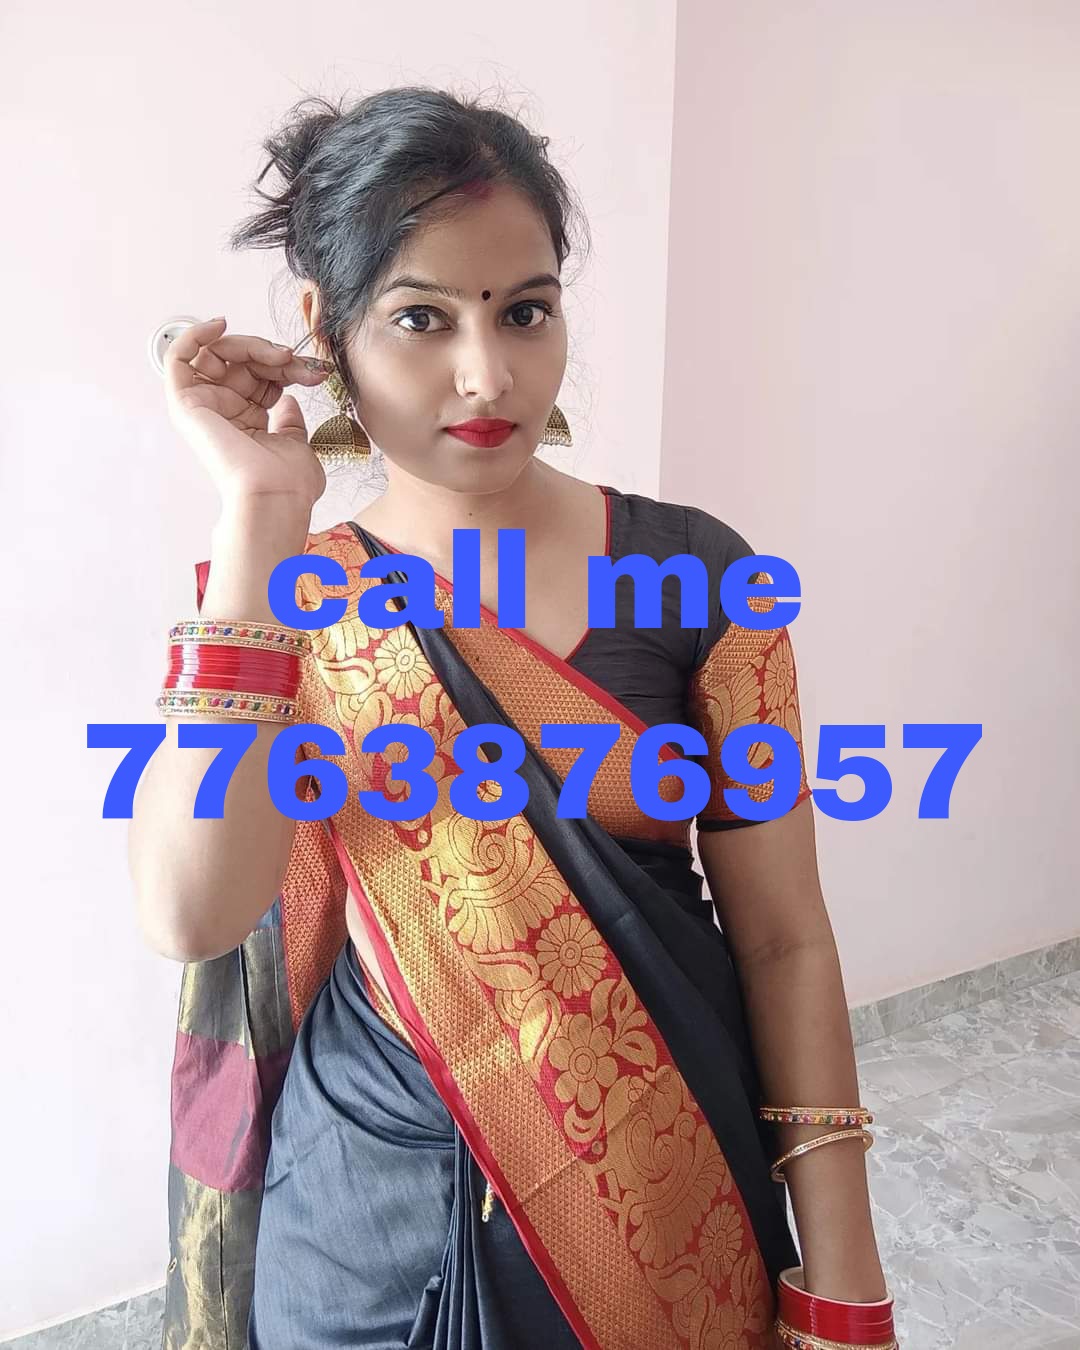 MALDA CALL GIRL LOW PRICE CASH PAYMENT SERVICE AVAILABLE 